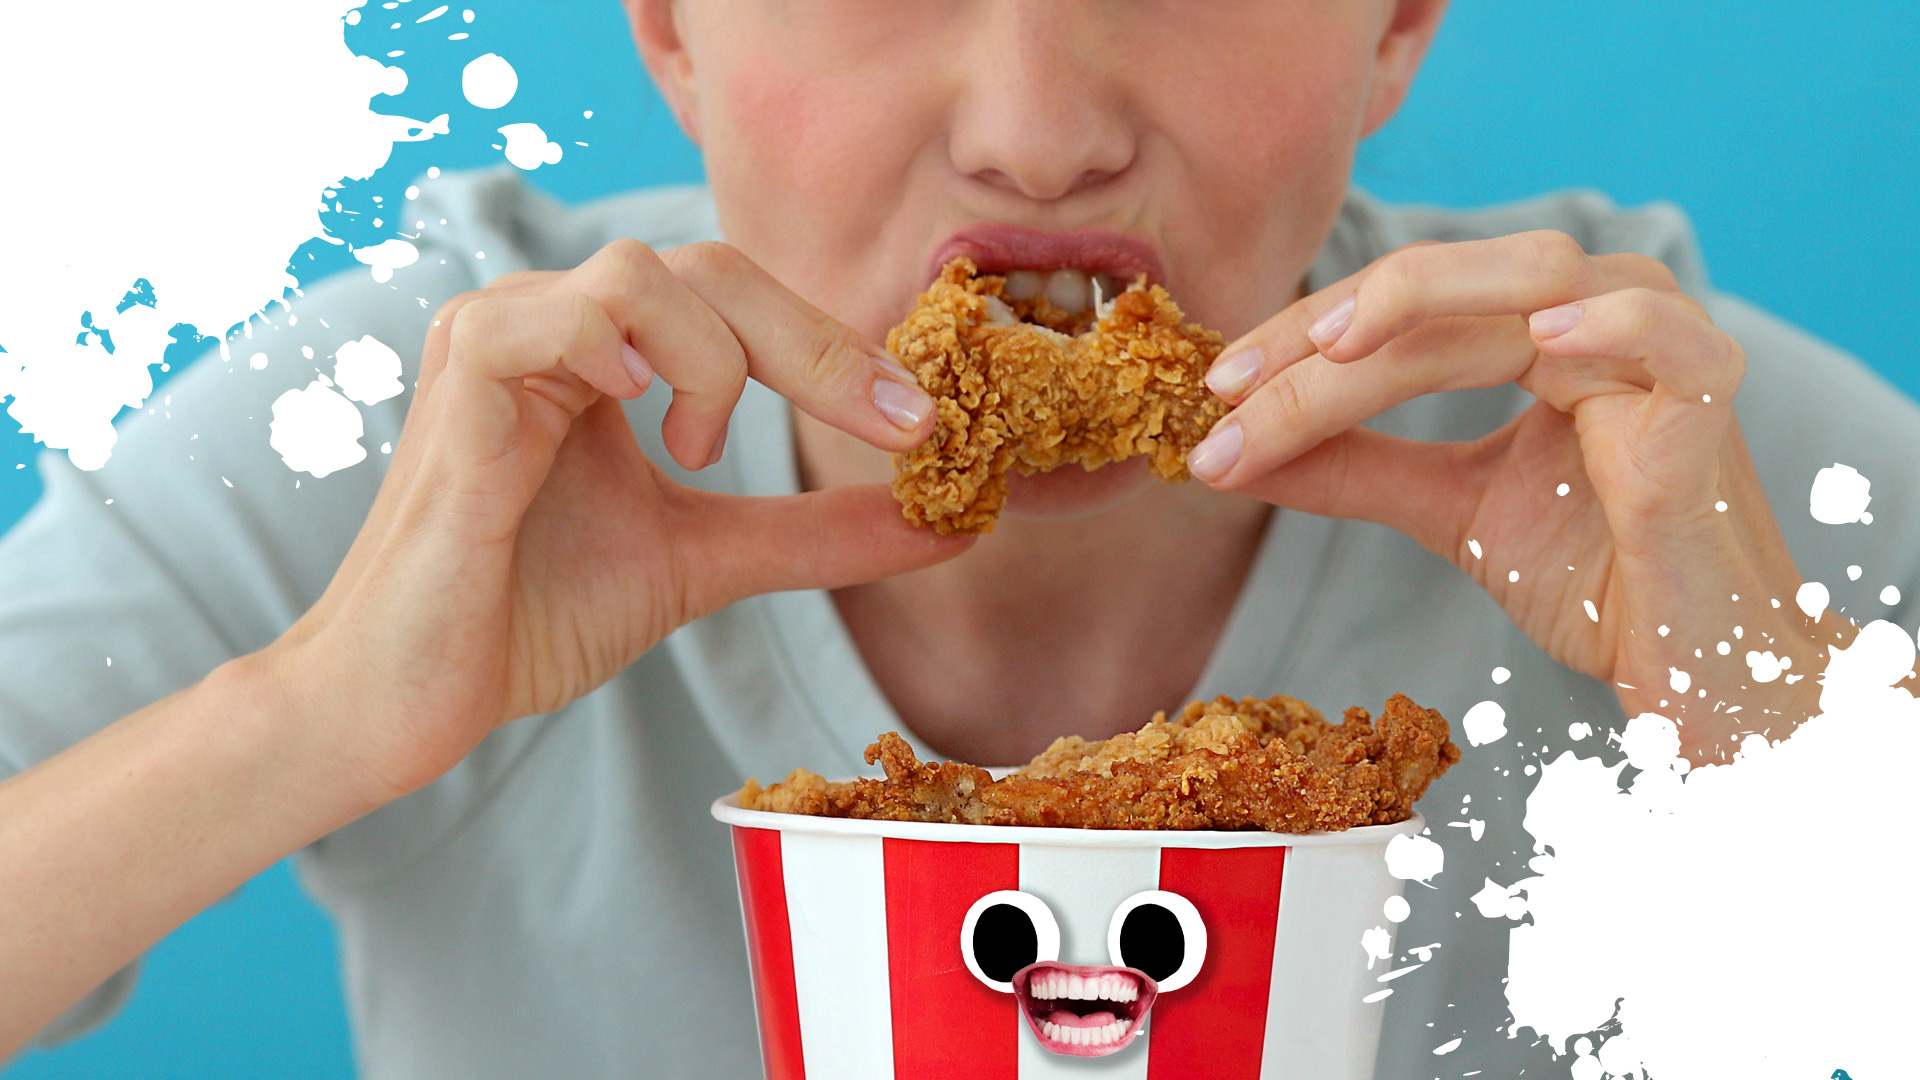 A person tucking into a bucket of fried chicken